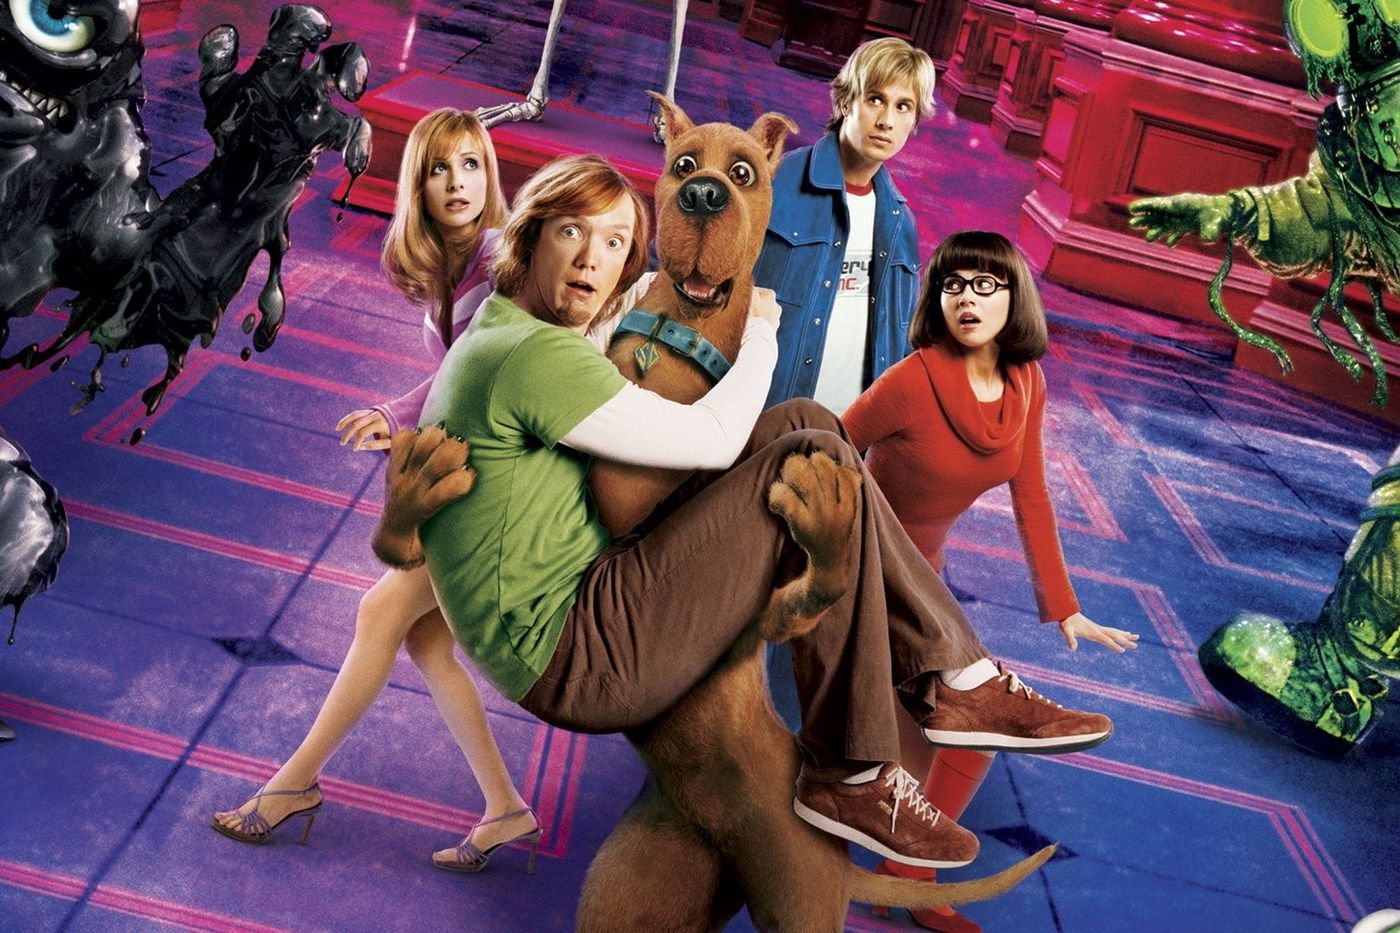 danielle hibbert recommends Scooby Doo Sex Movies